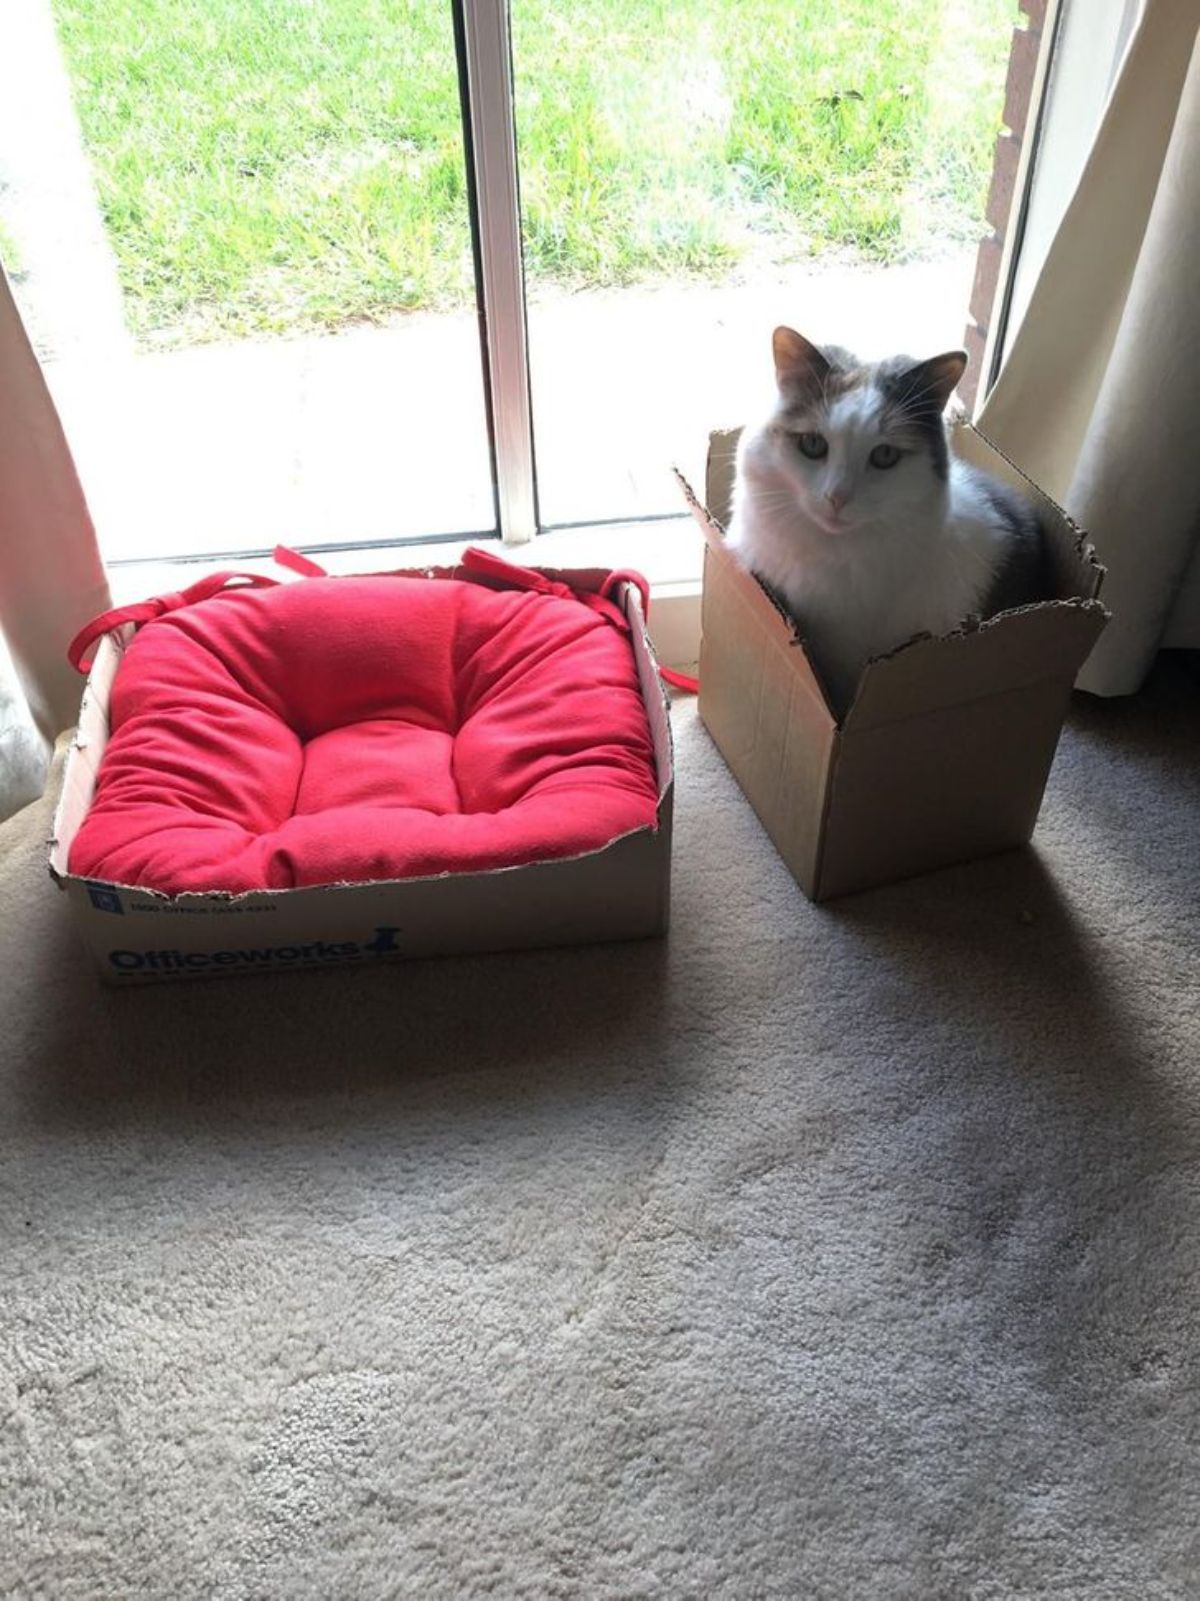 black and white cat sitting inside a small cardboard box next to a red cat bed by a glass door